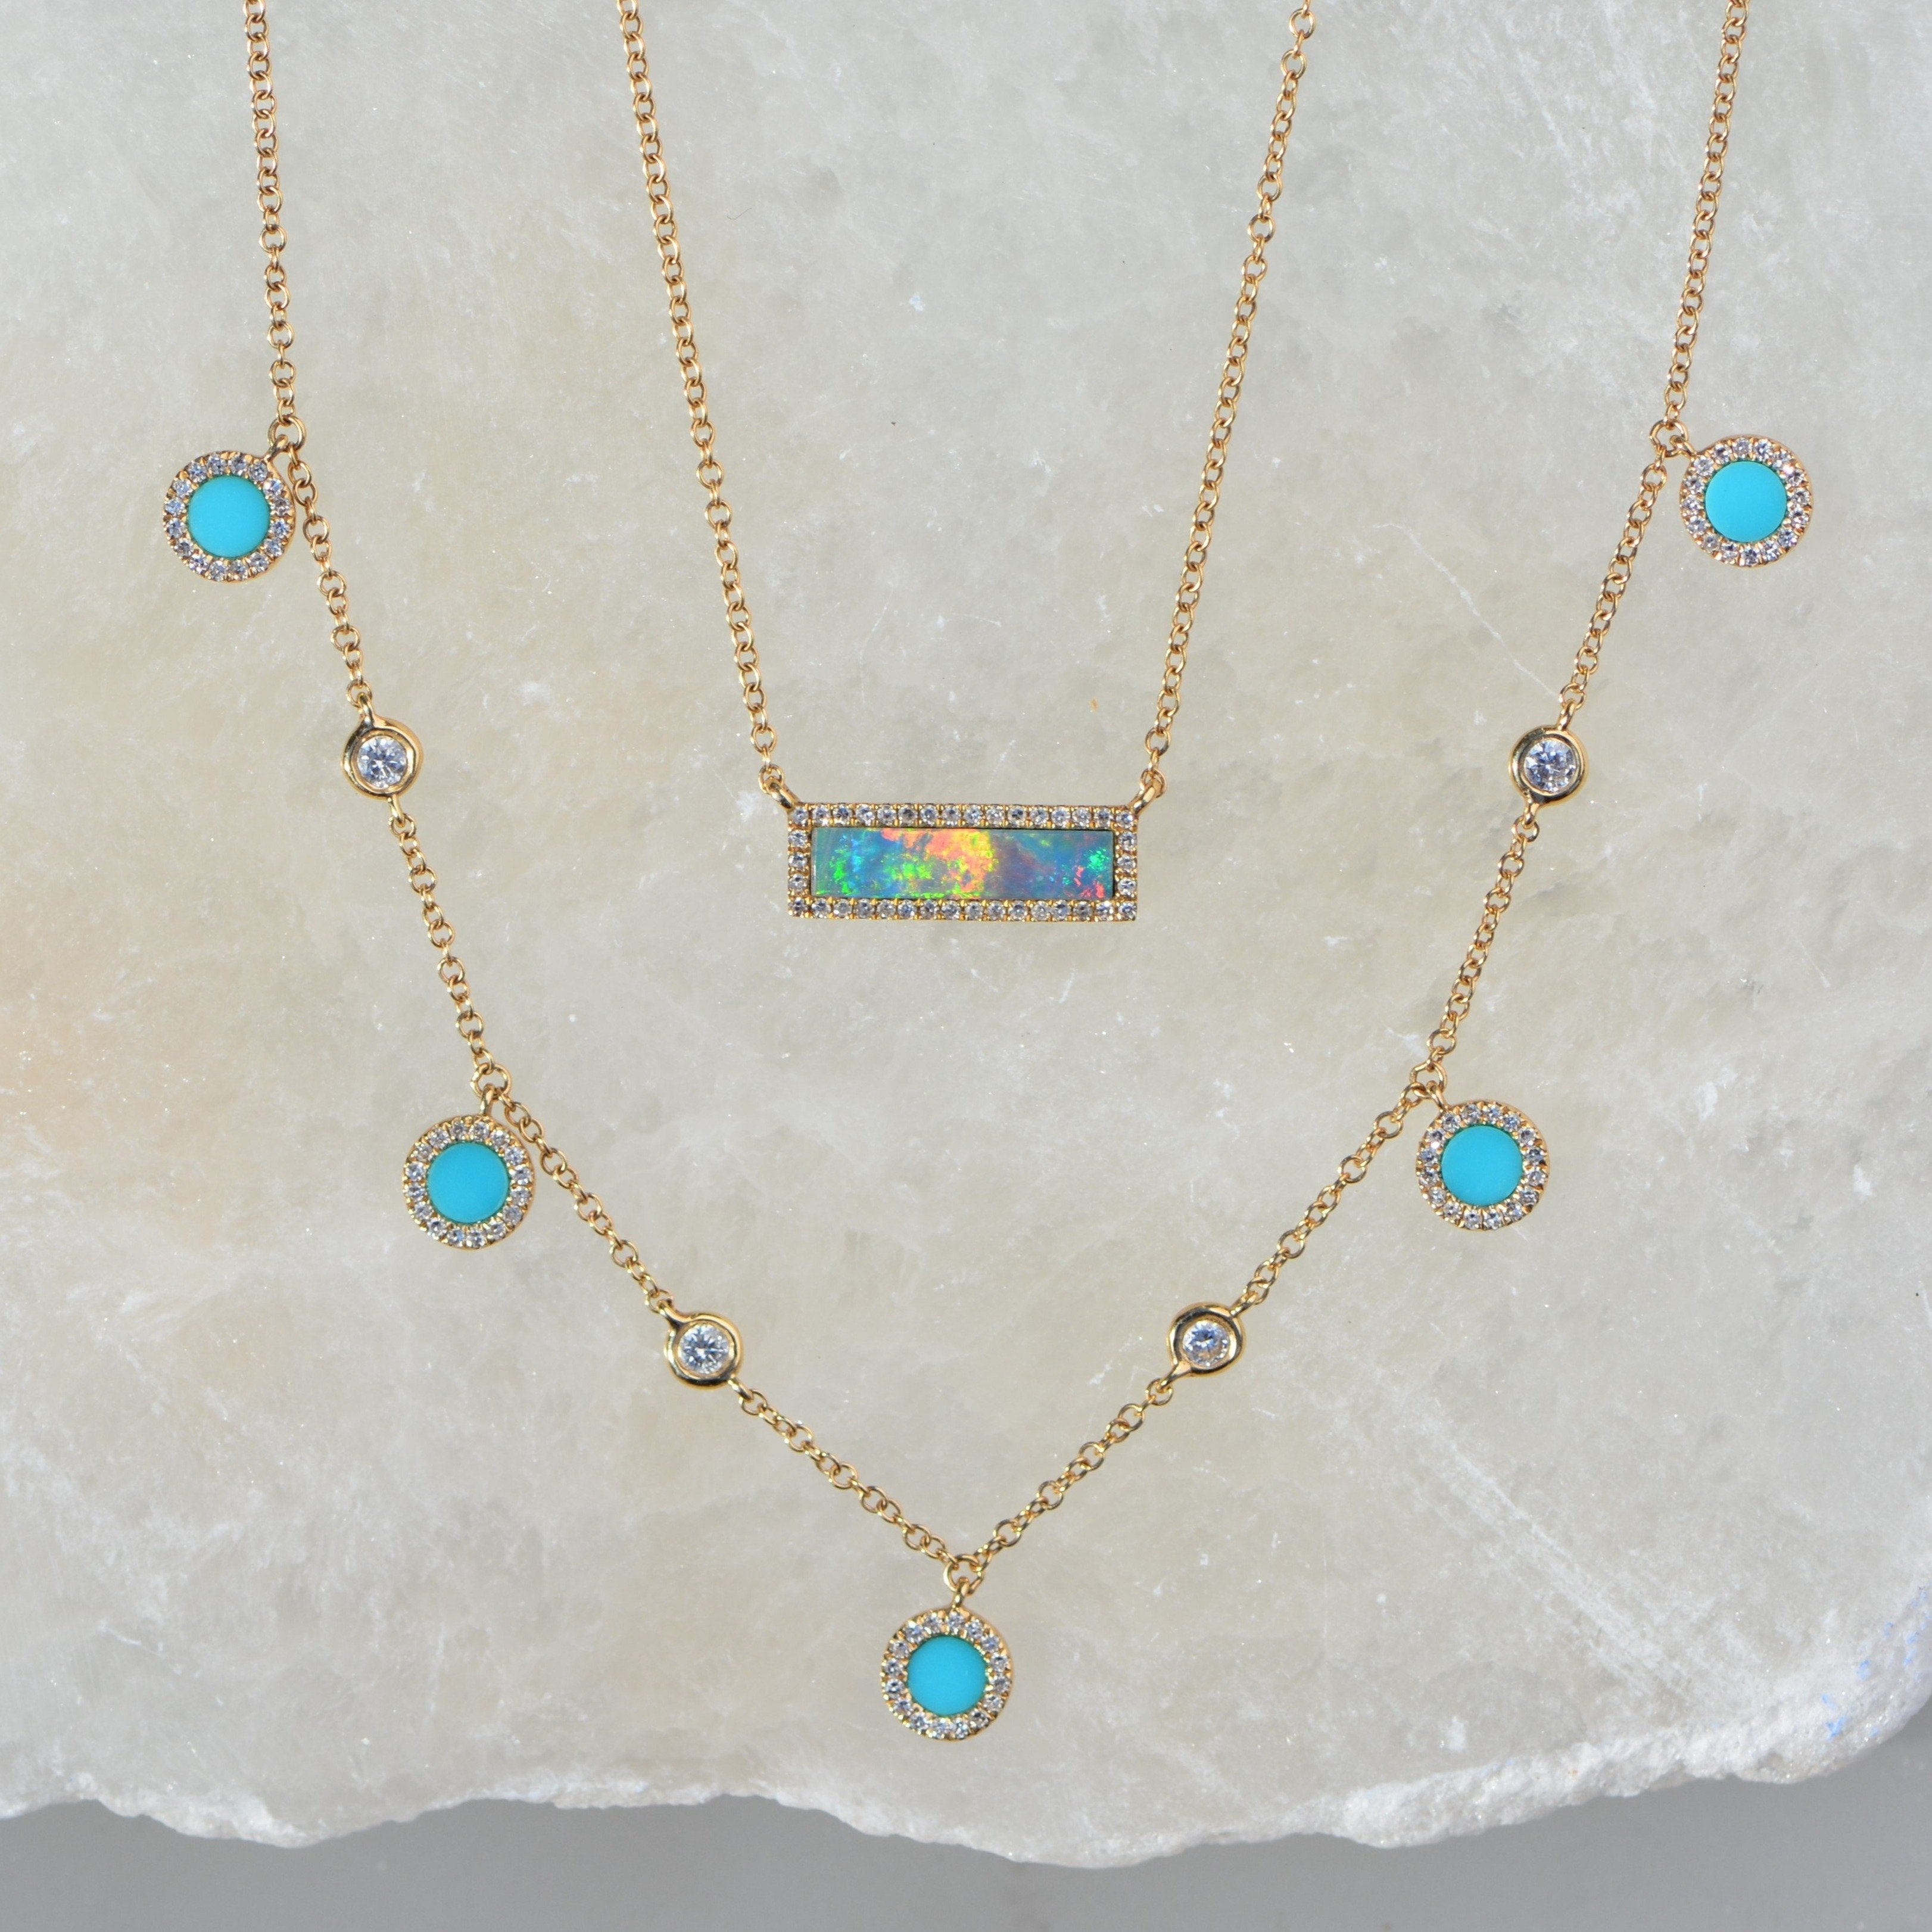 Turquoise Diamond Choker Necklace in 14k Gold Layered With Reflection Opal